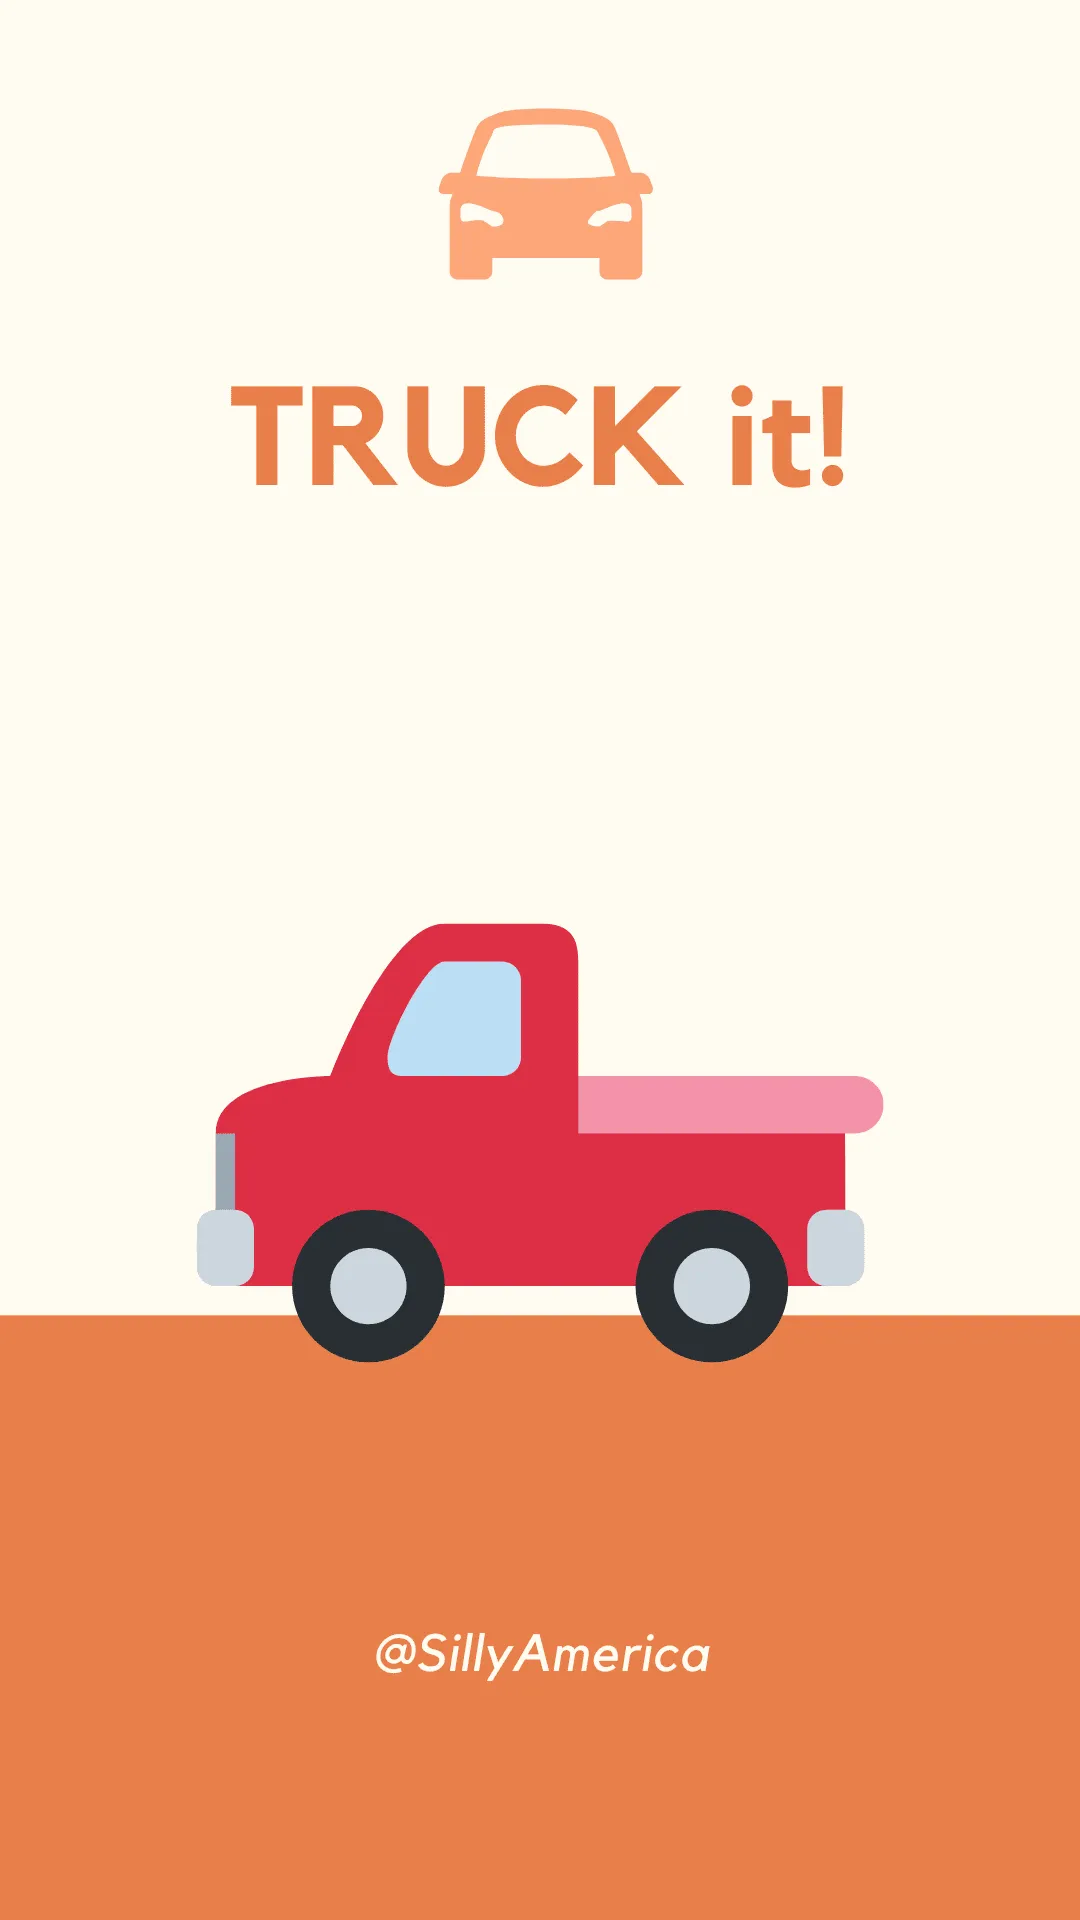 TRUCK it! - Car Puns to fuel your road trip content!